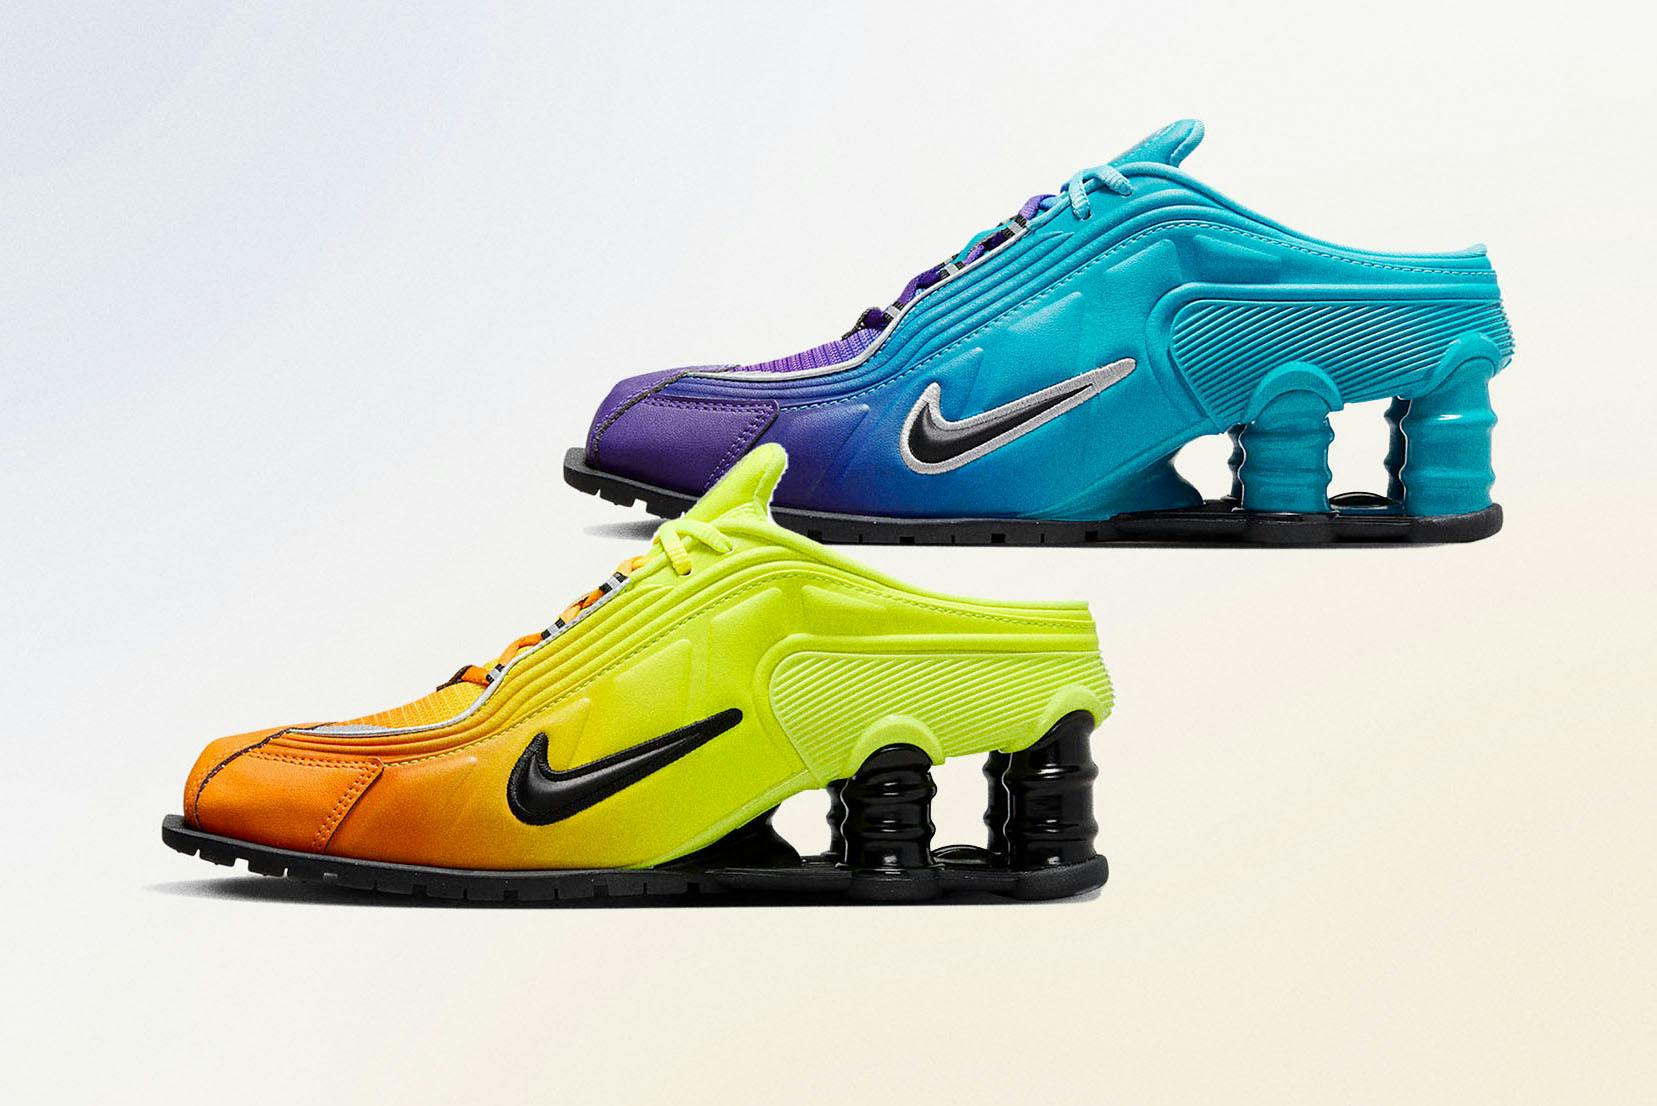 Yes, there will be a restock of the Nike Shox MR4 by Martine Rose